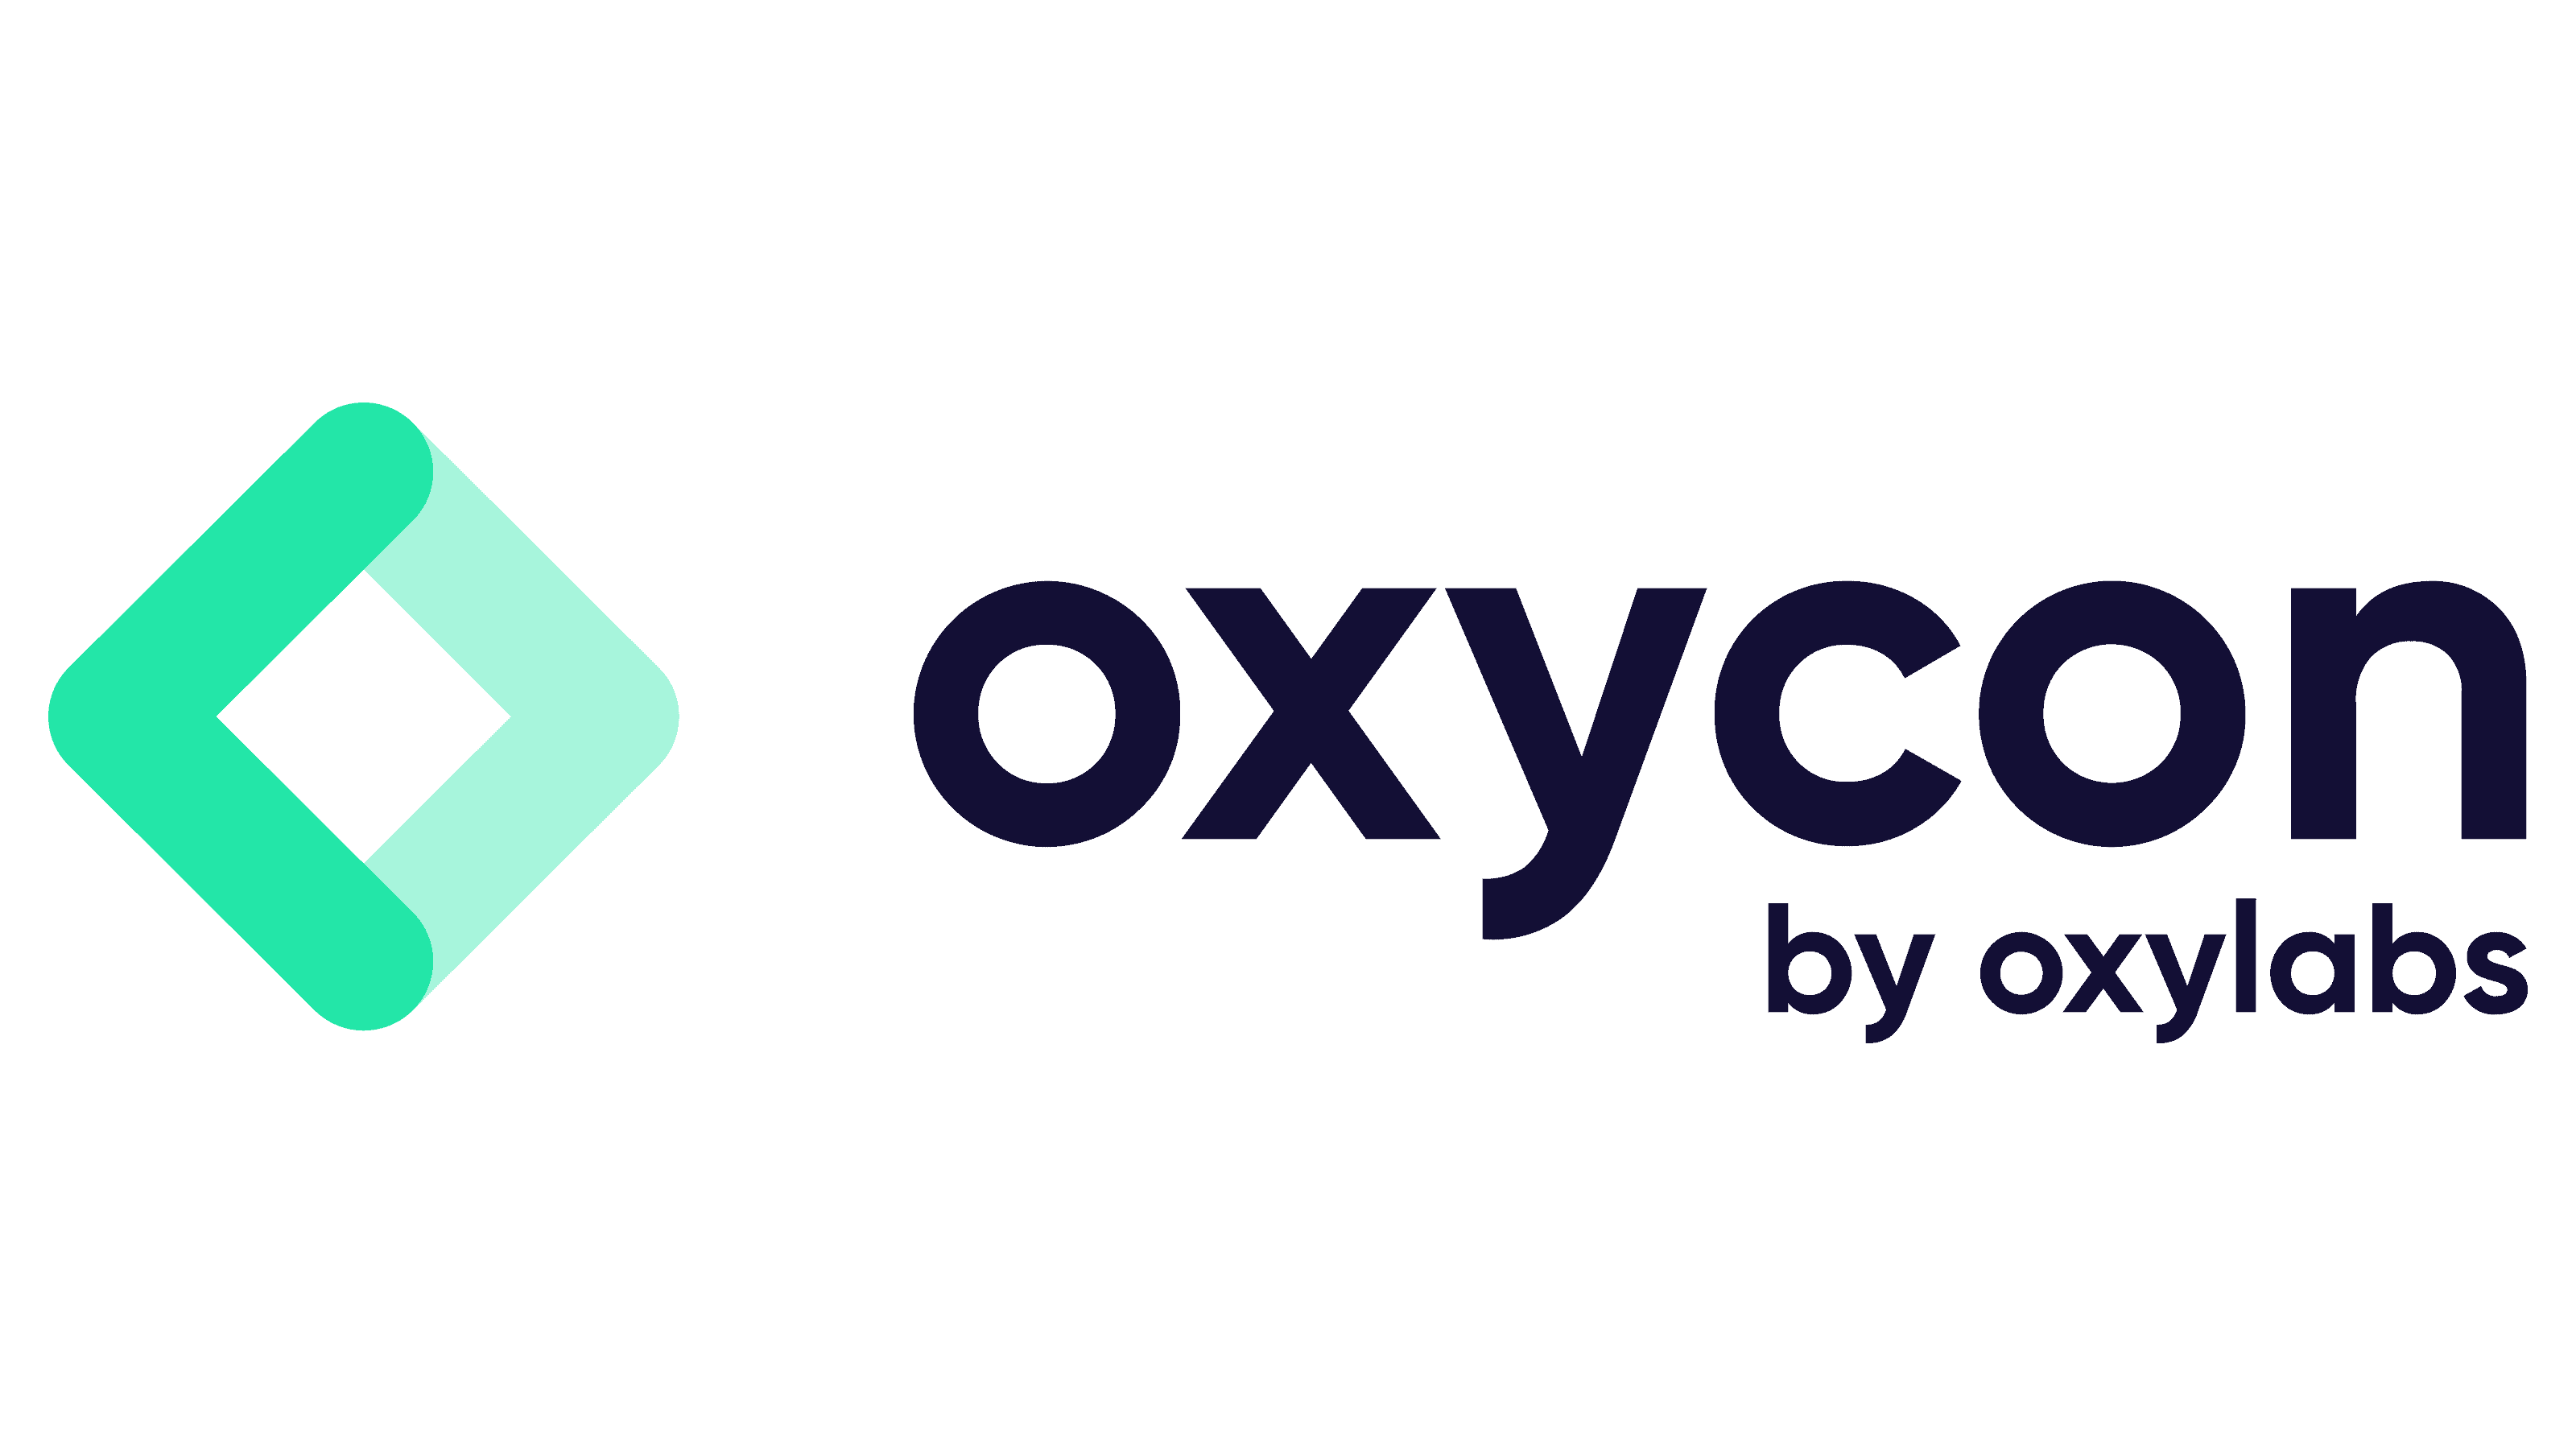 oxycon logo for the news feed